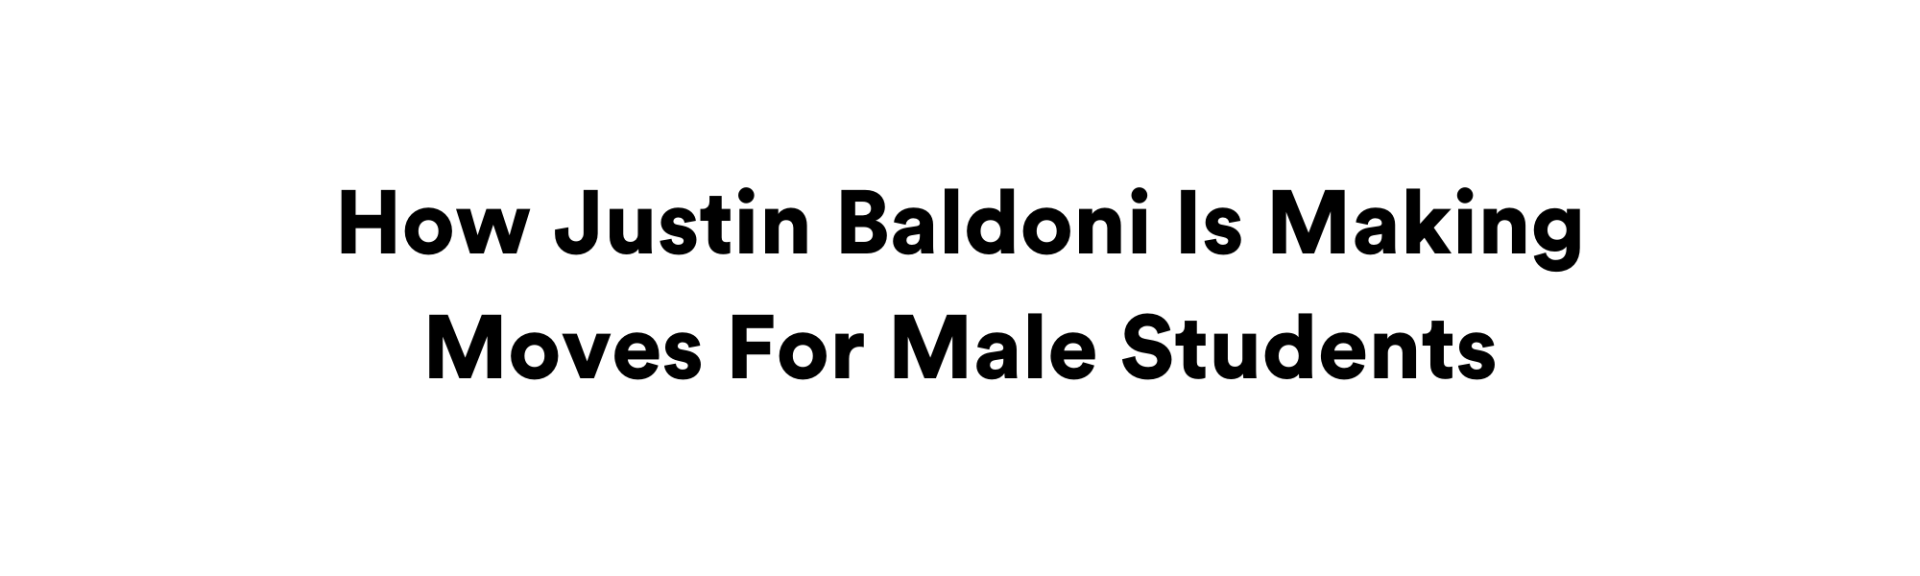 How Justin Baldoni Is Making Moves For Male Students